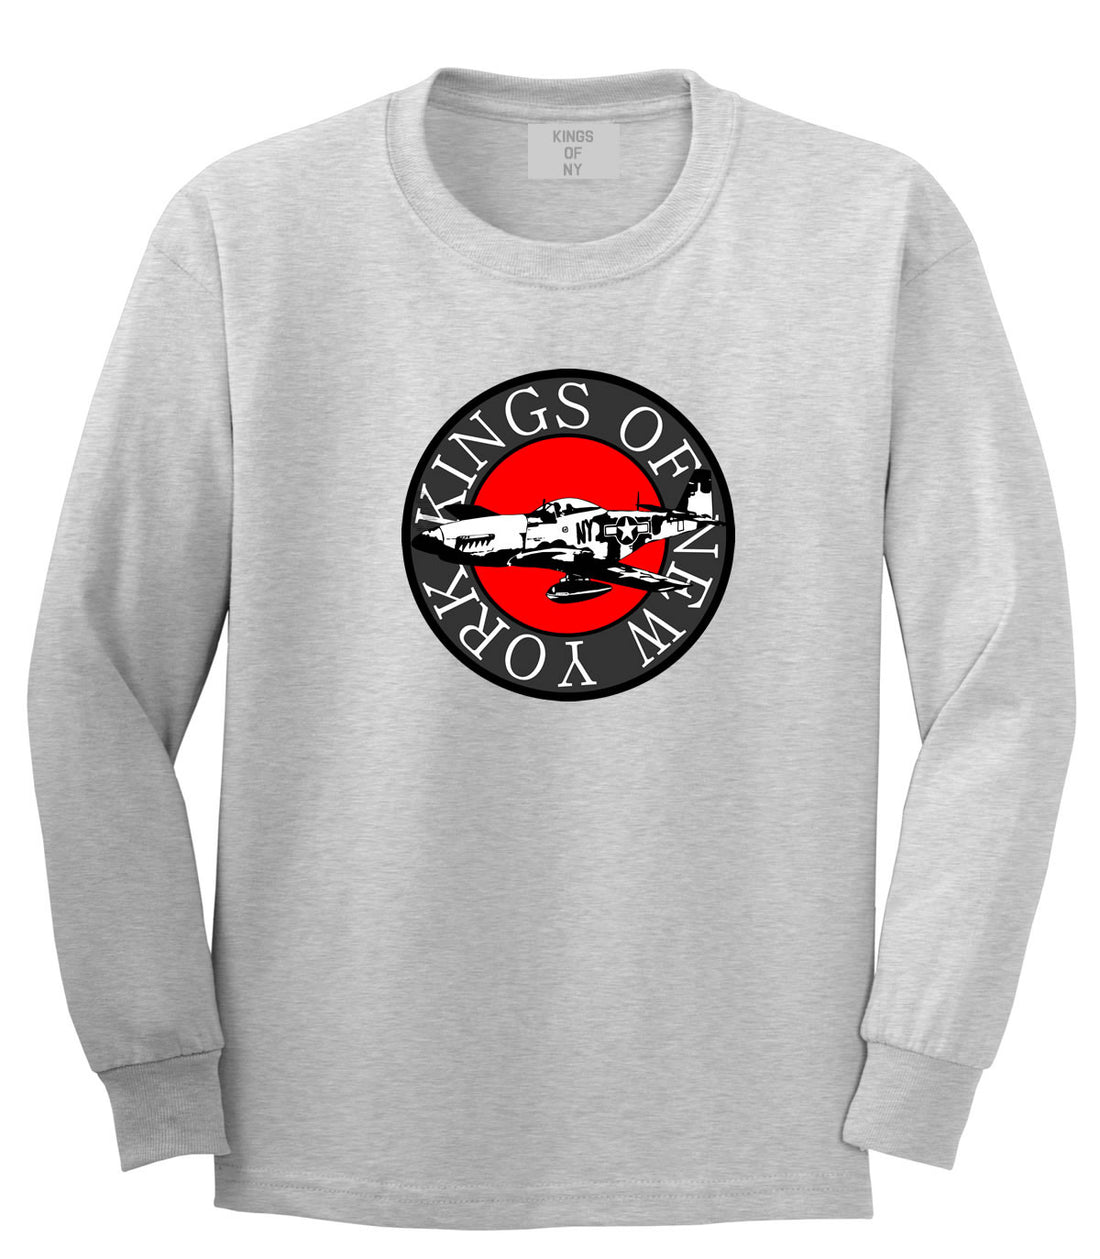 Kings Of NY Airplane World War  Long Sleeve T-Shirt in Grey